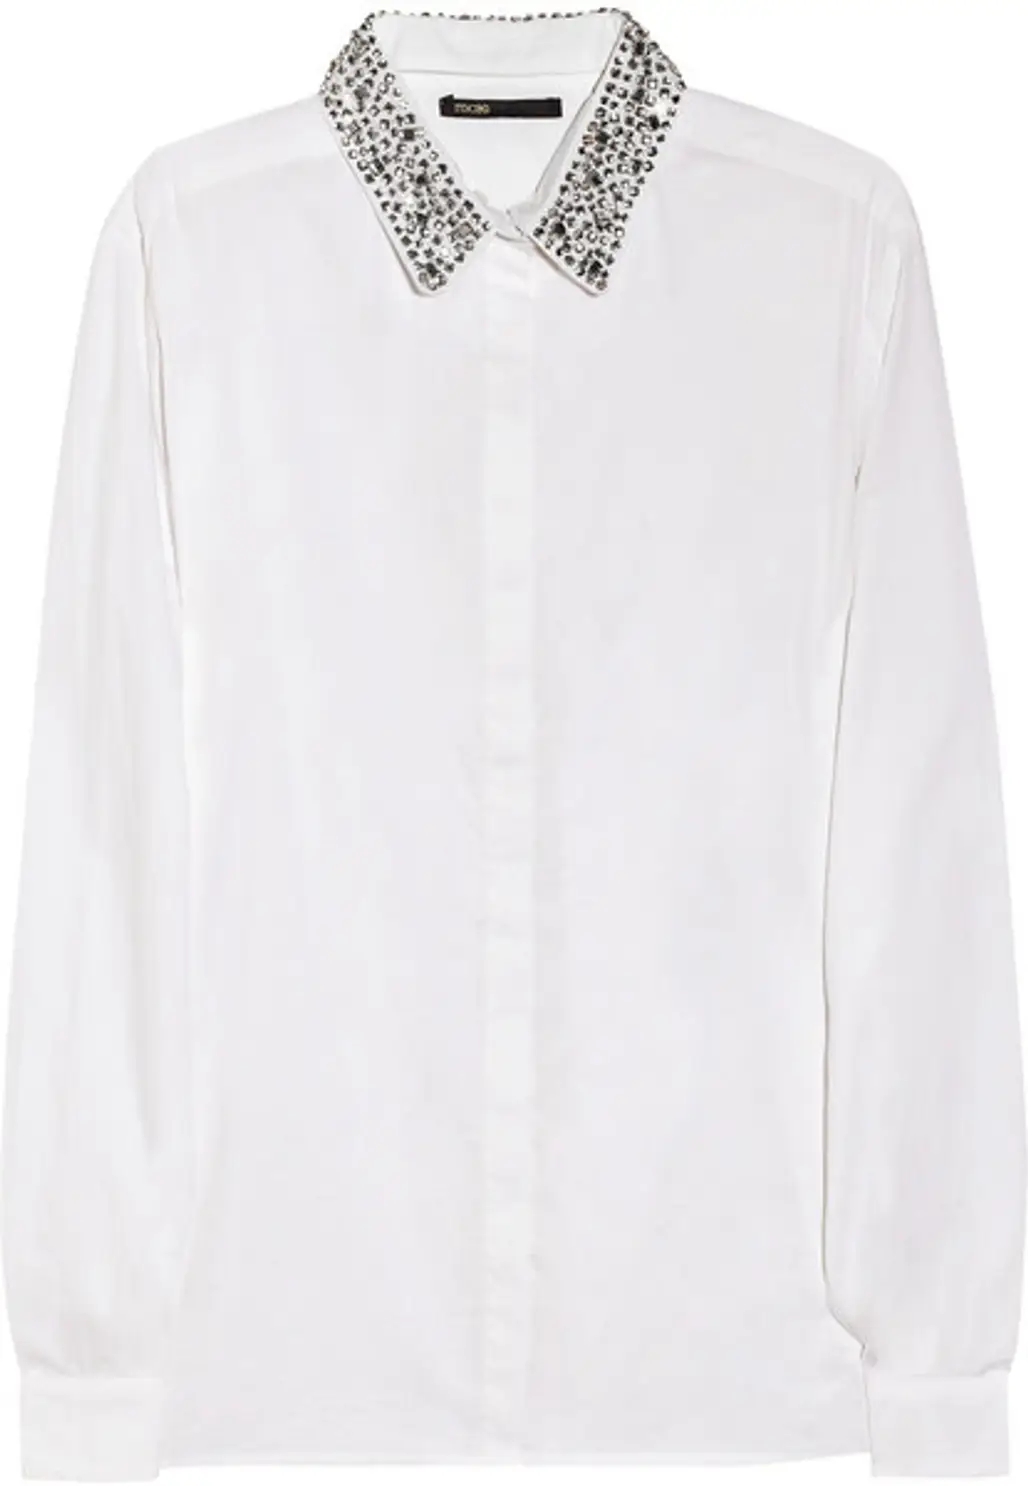 8 Trendy and Chic Embellished Collar Tops ...